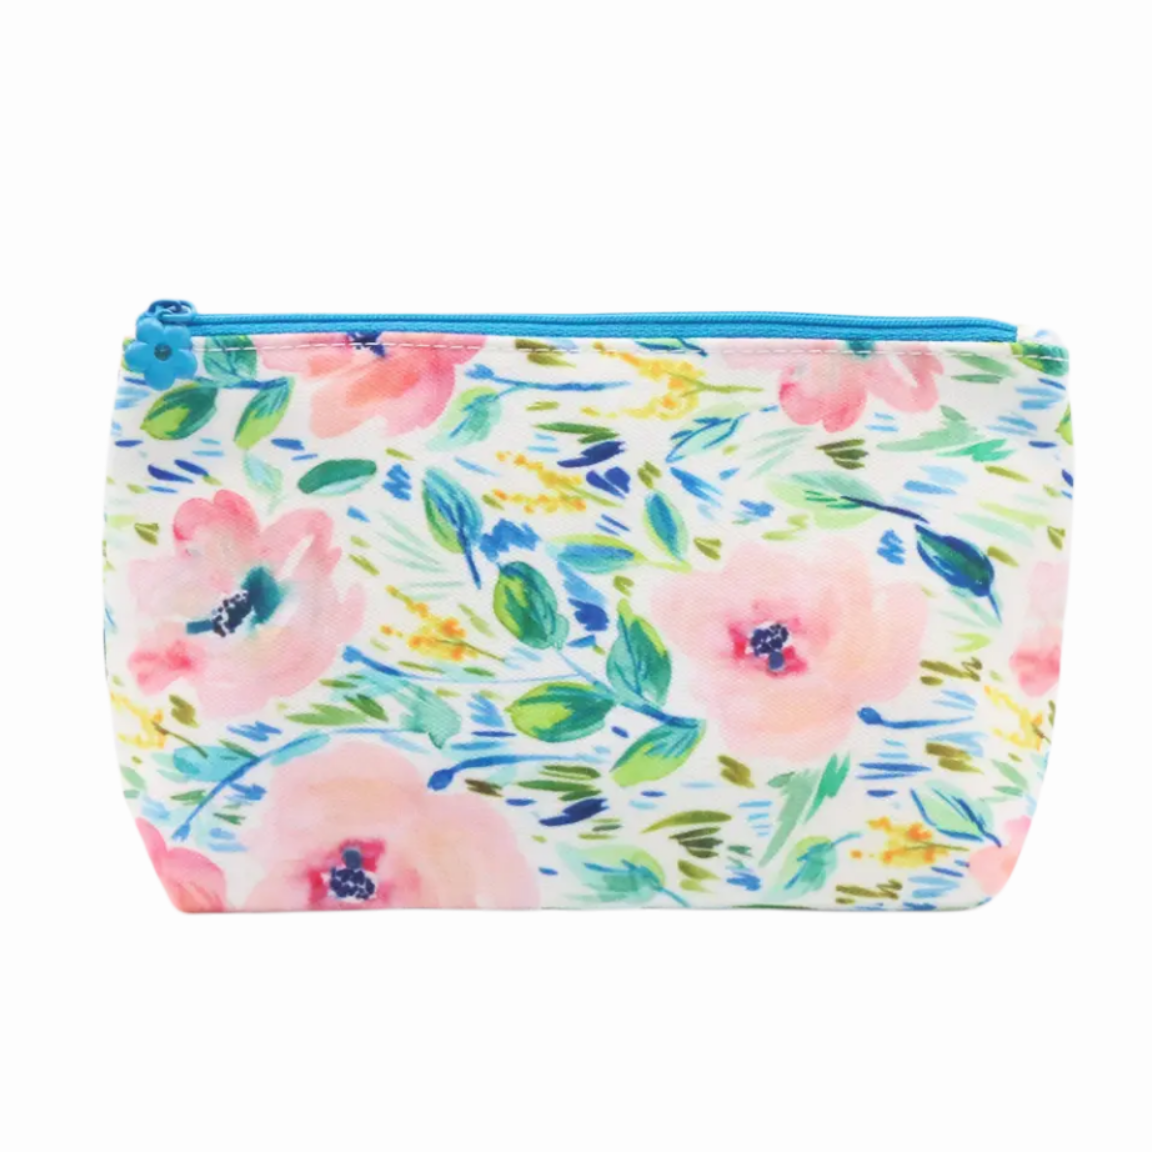 New Colorful Floral Prints White Eco-friendly Promotional Canvas Make up Bag Travel Custom Logo Cotton Makeup Pouch Cosmetic Bag